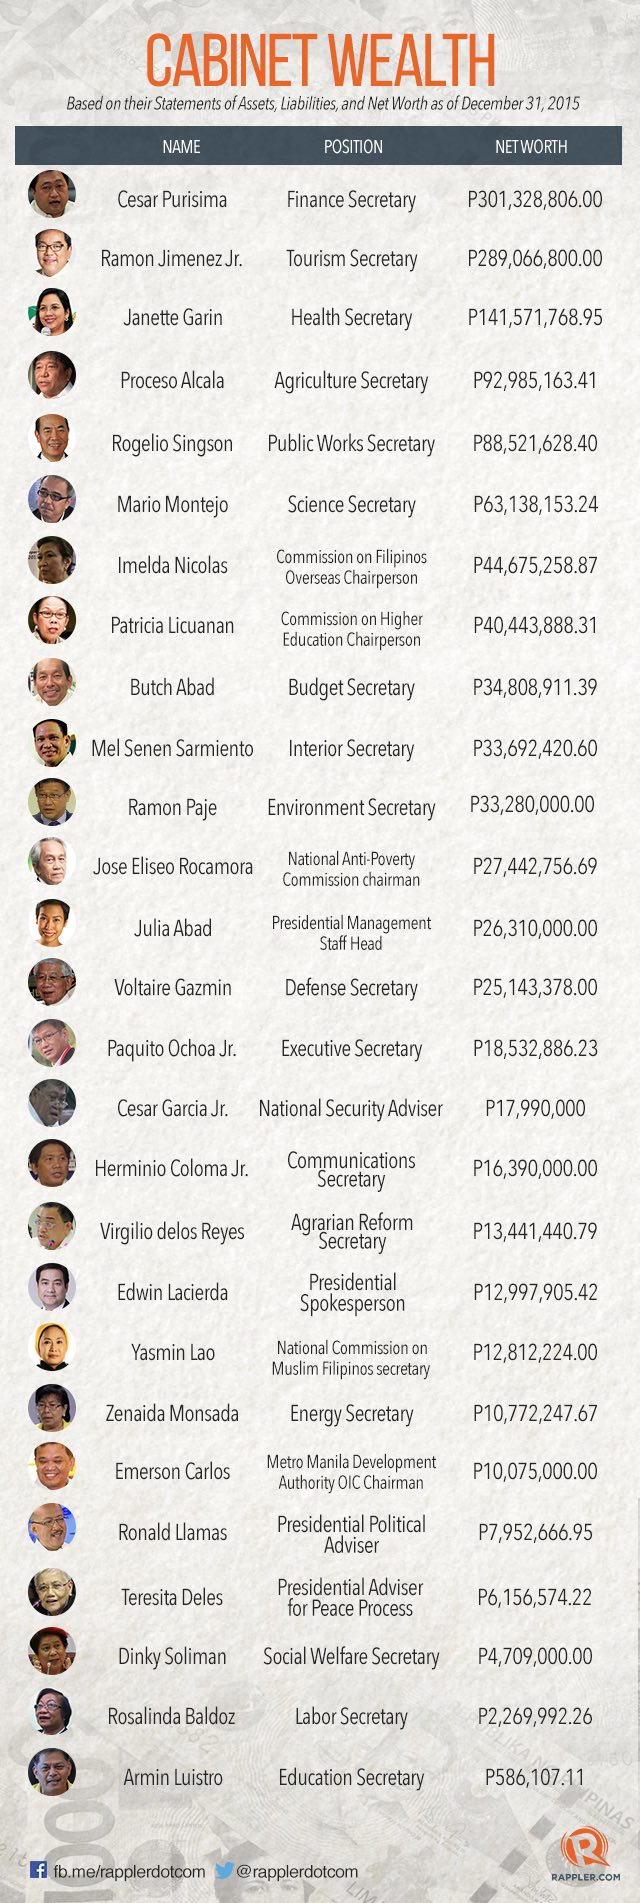 How Many Cabinet Members Of The Philippines 2019